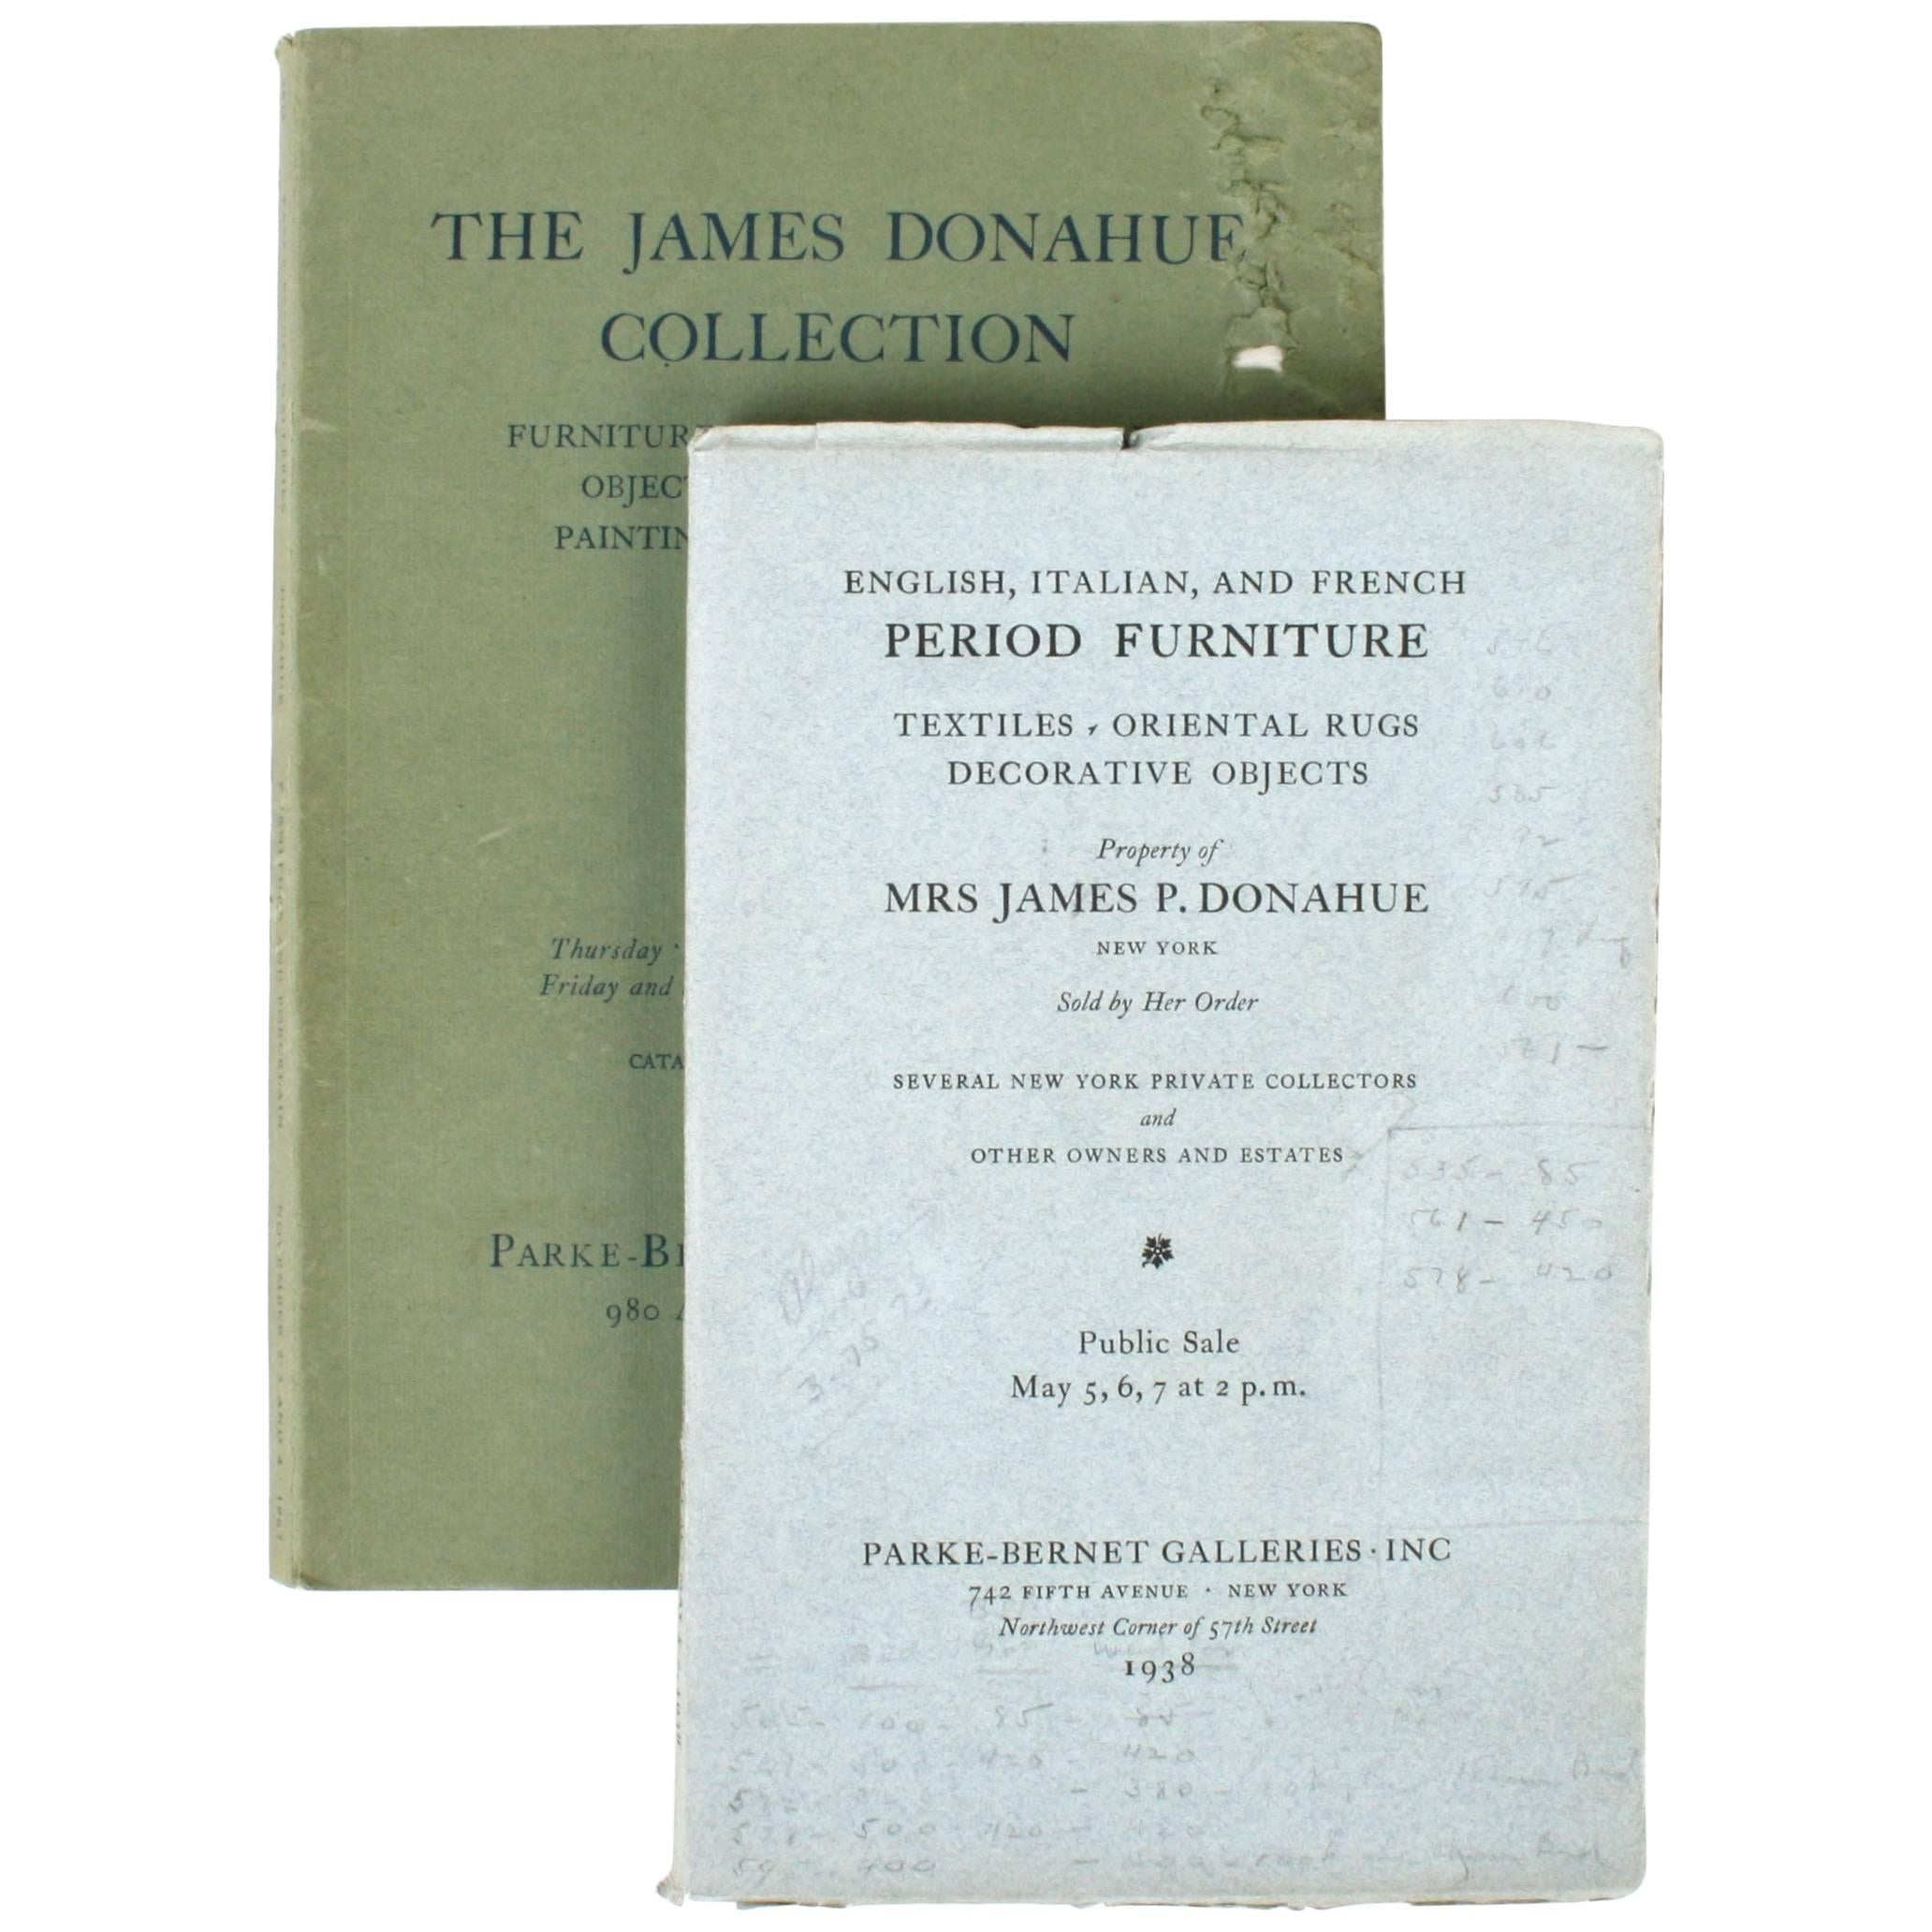 Two Auction Catalogues for the Property of James P. Donahue